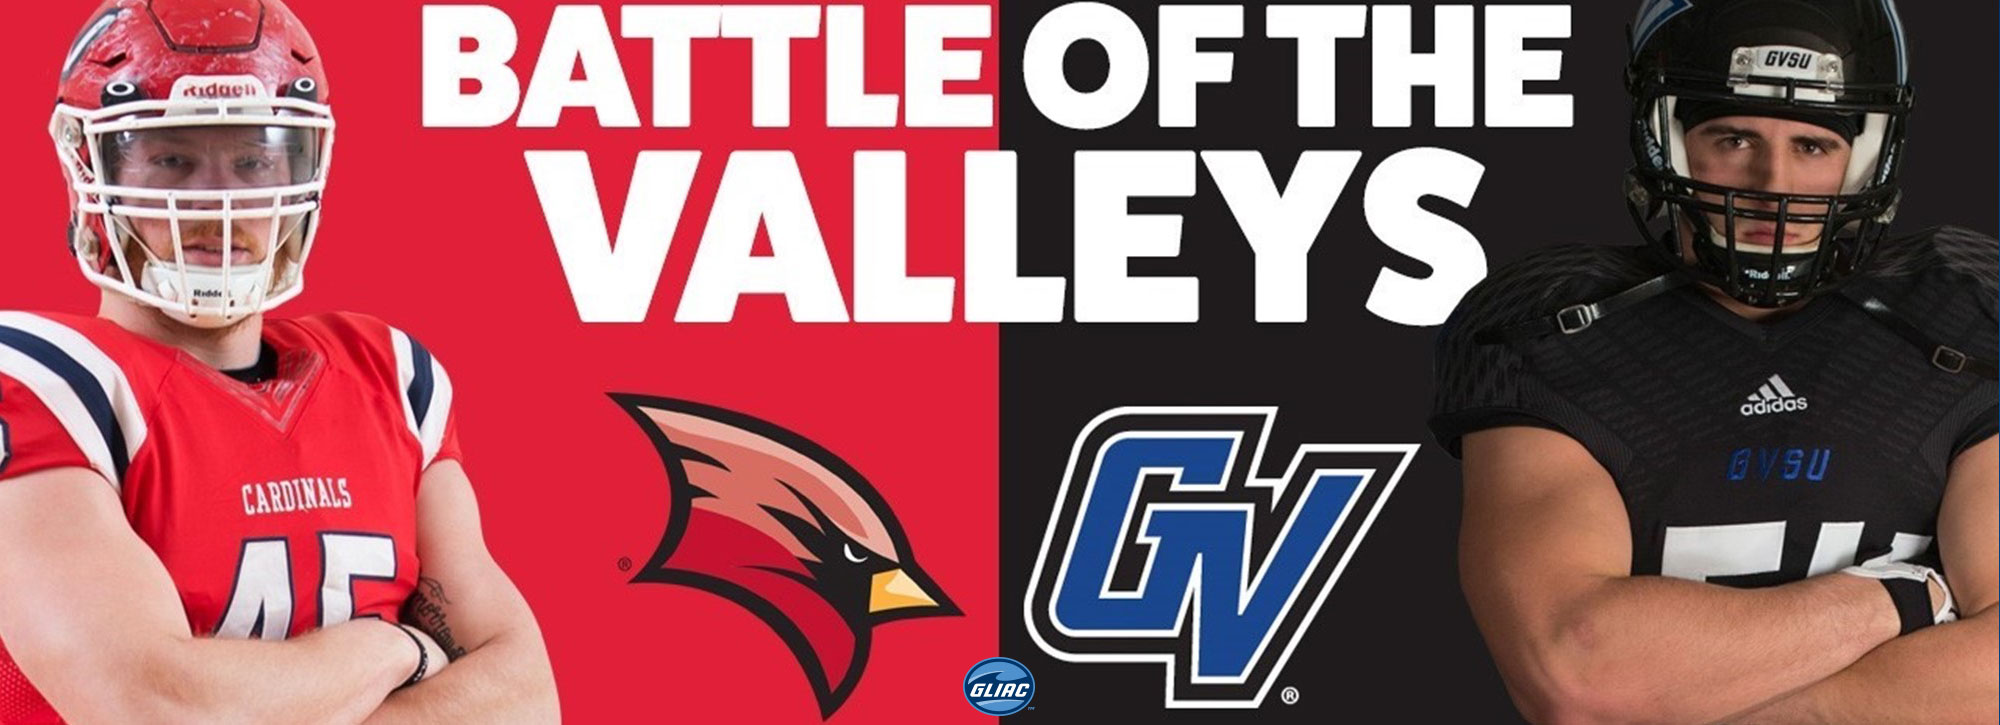 Battle of the Valleys Football Game to Feature New Look